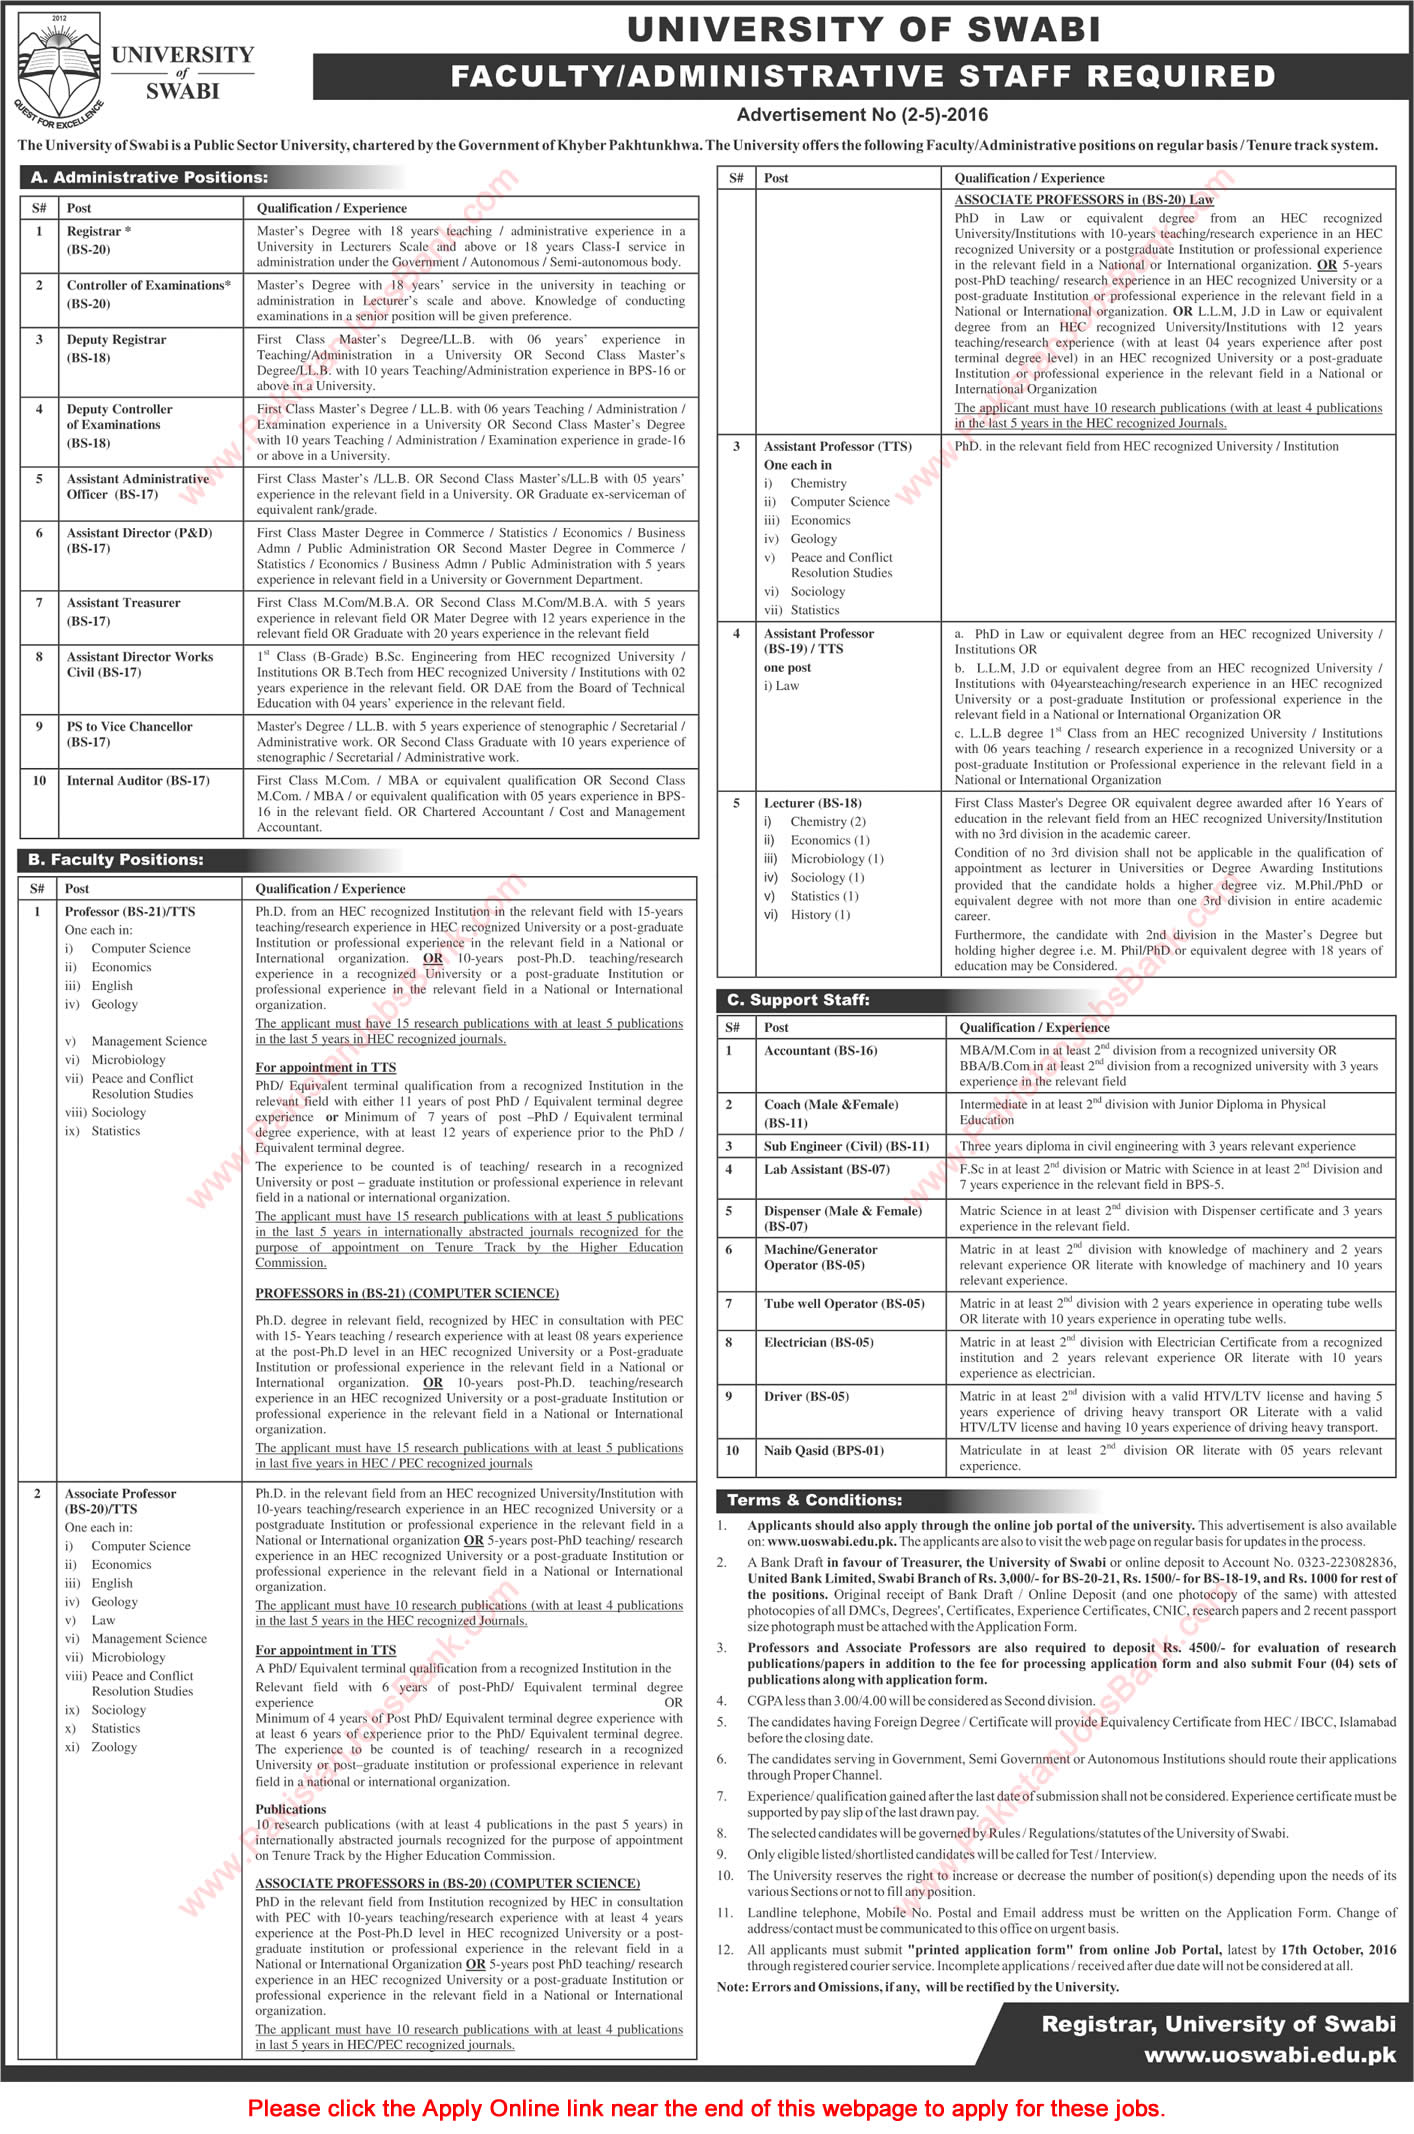 University of Swabi Jobs 2016 October Apply Online Teaching Faculty, Admin & Support Staff Latest / New